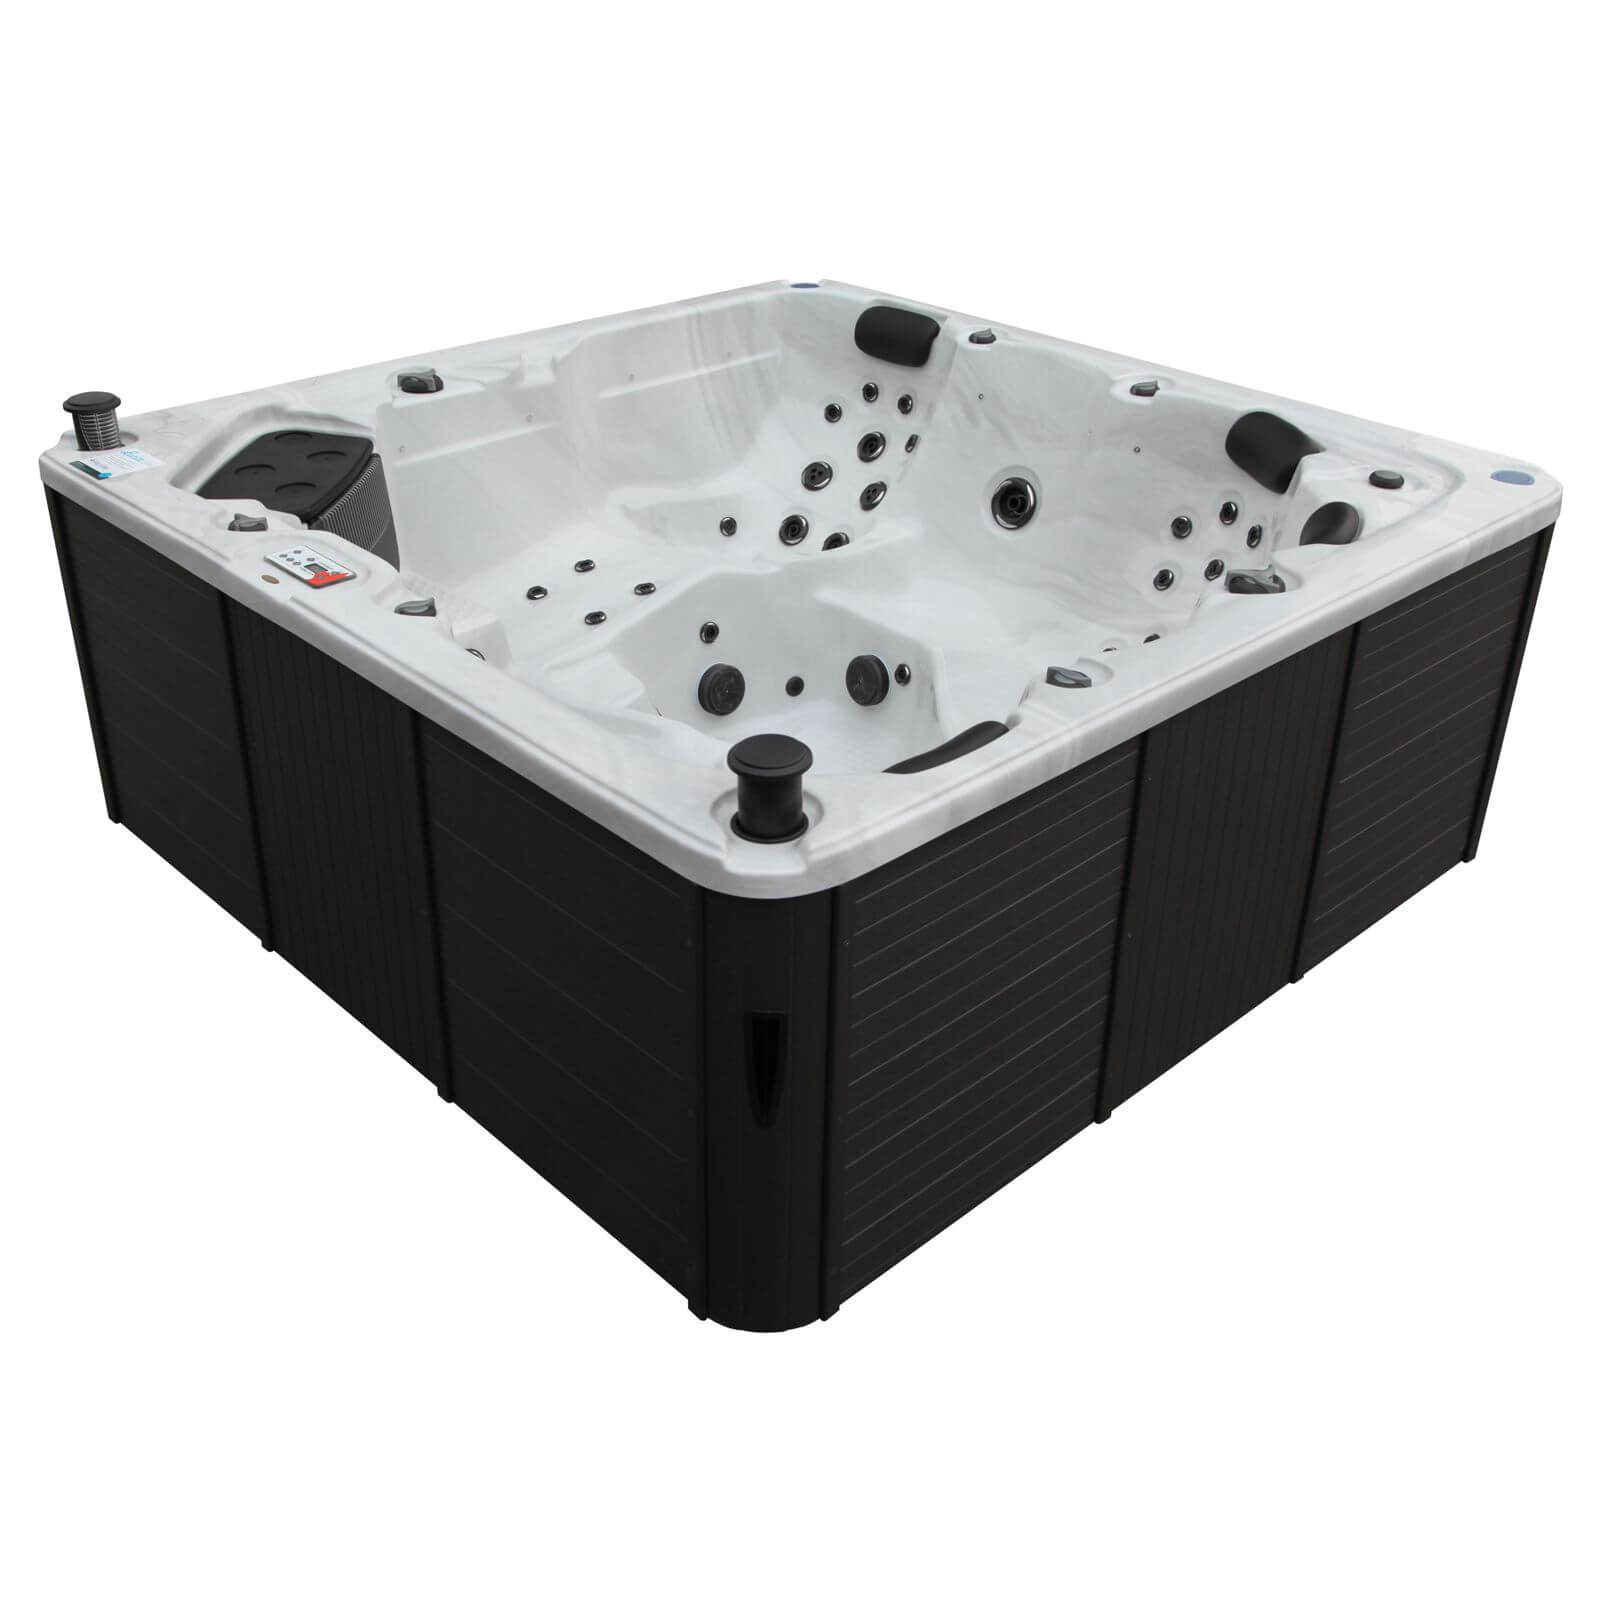 Canadian Spa Vancouver 6 Person Hot Tub (Includes Free Delivery and Installation)